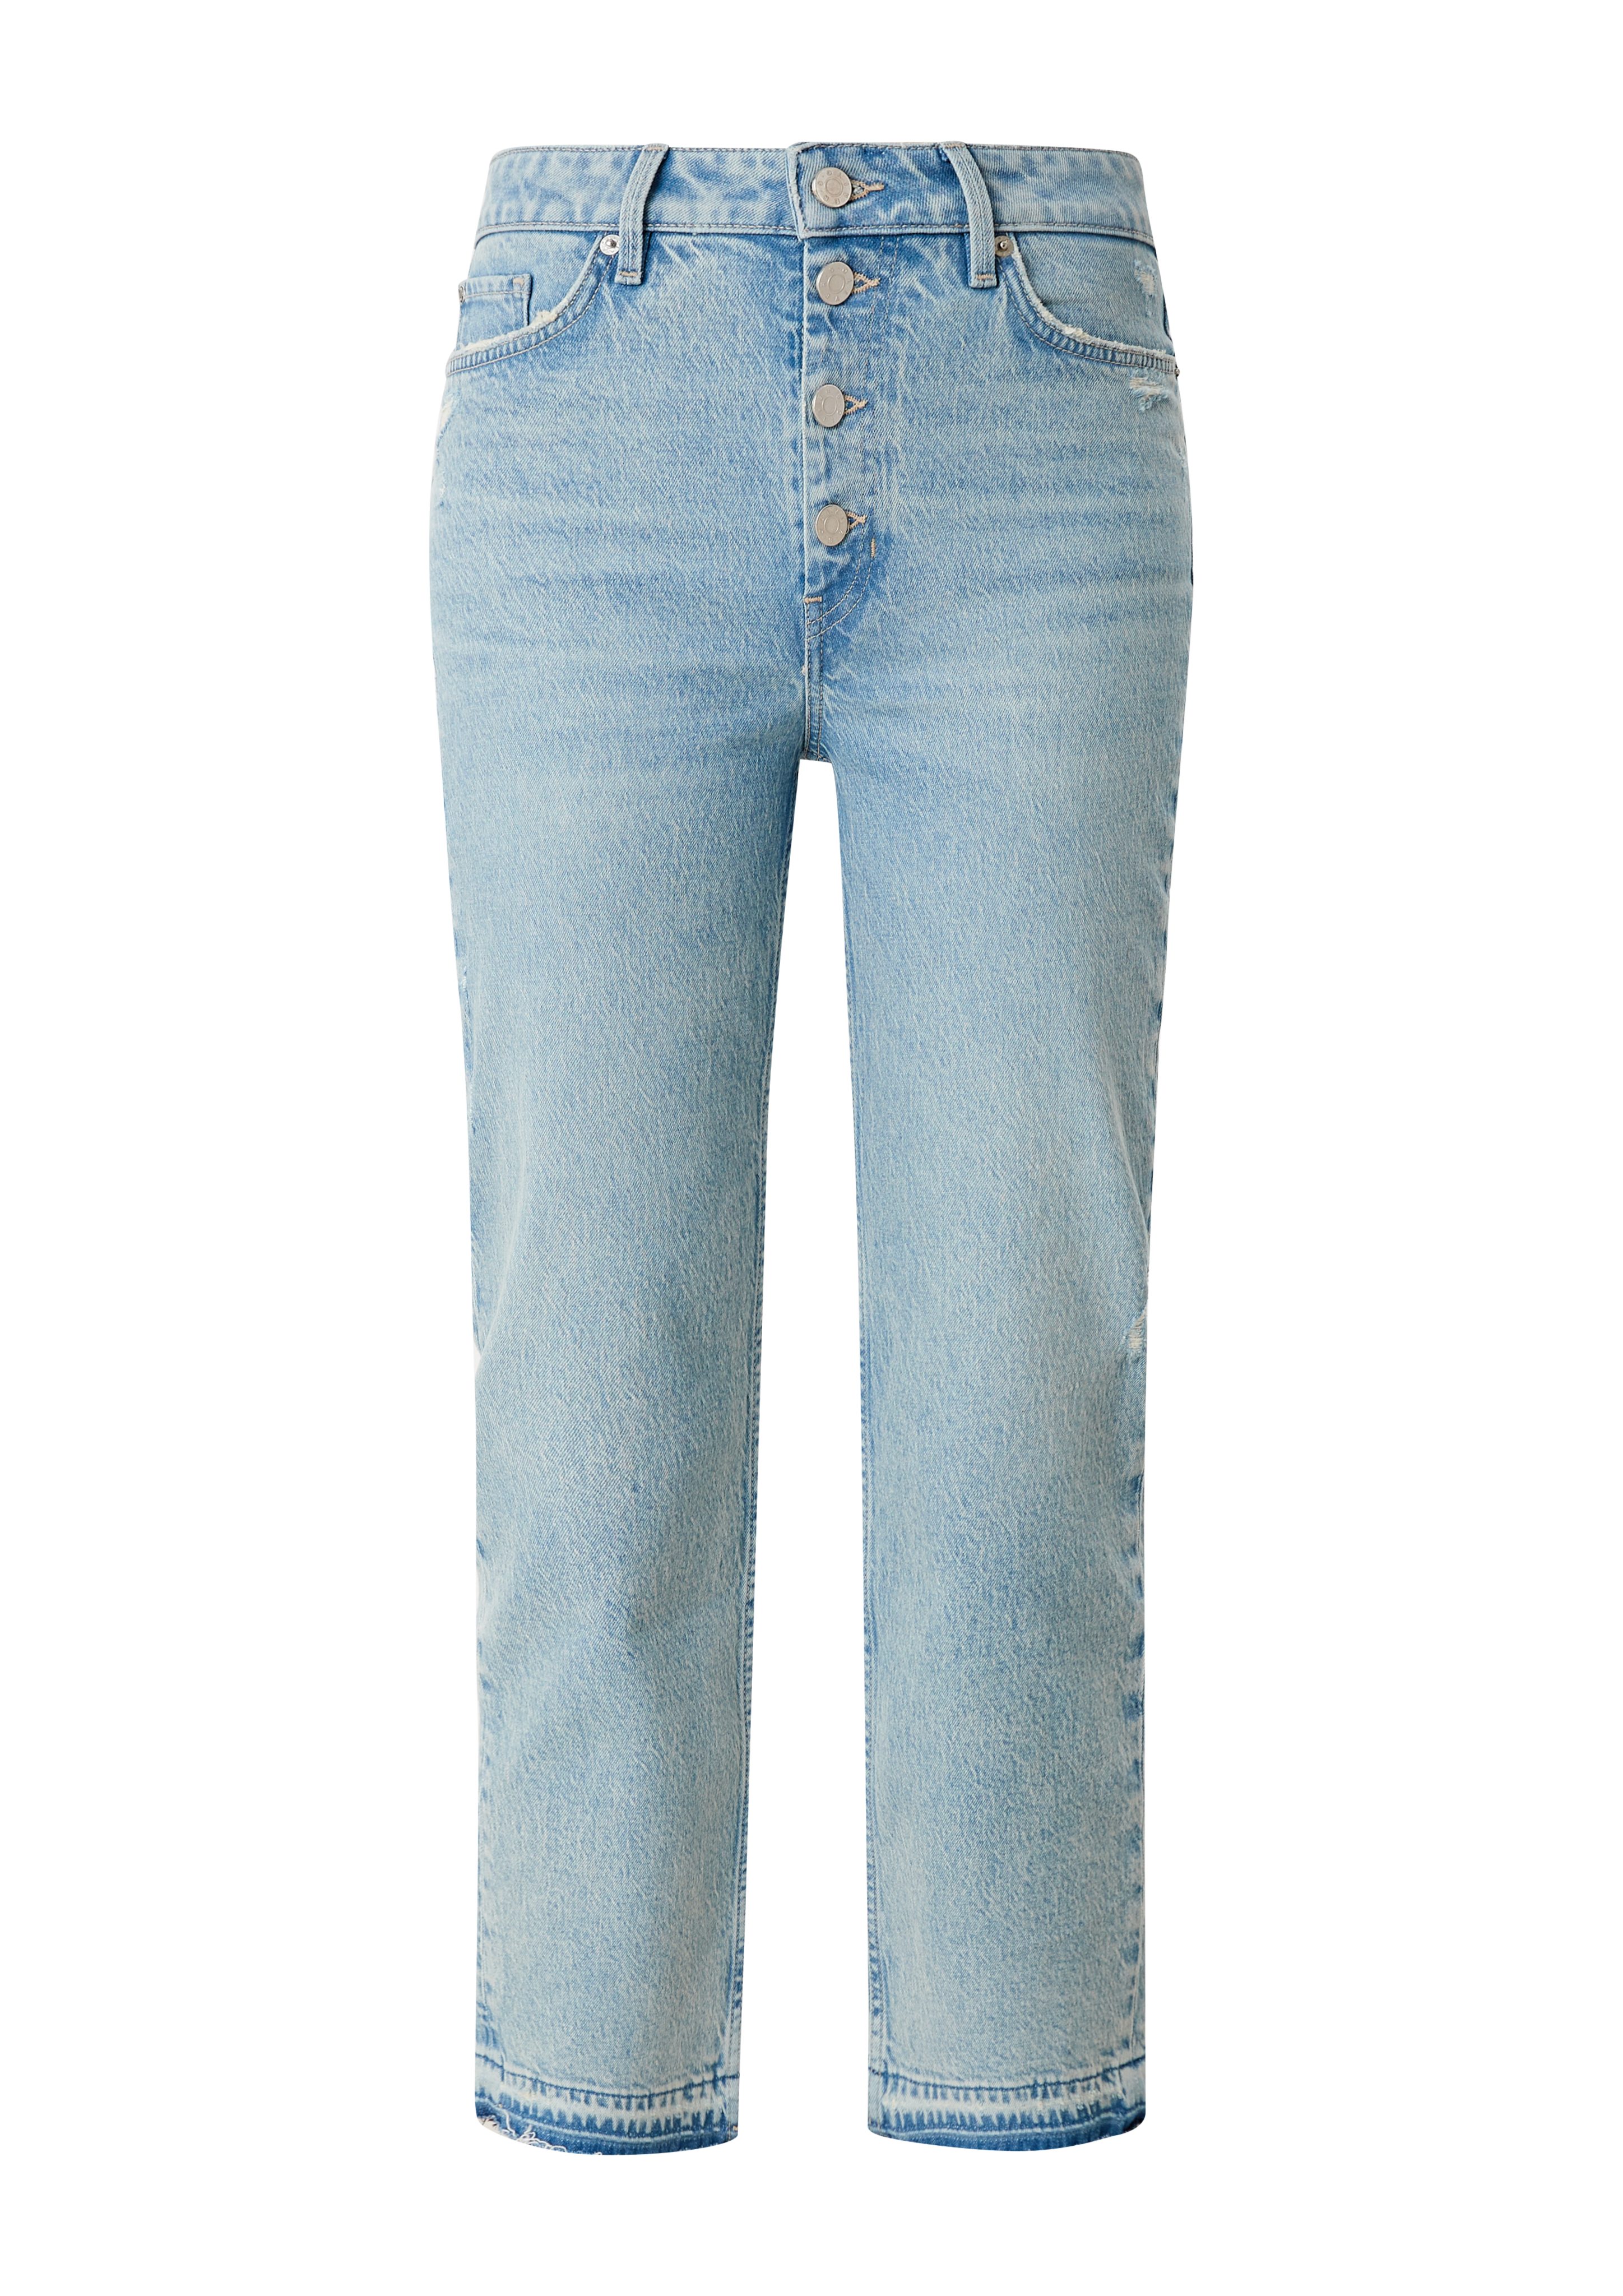 powder s.Oliver Regular: Jeans 7/8-Jeans blue Cropped Waschung